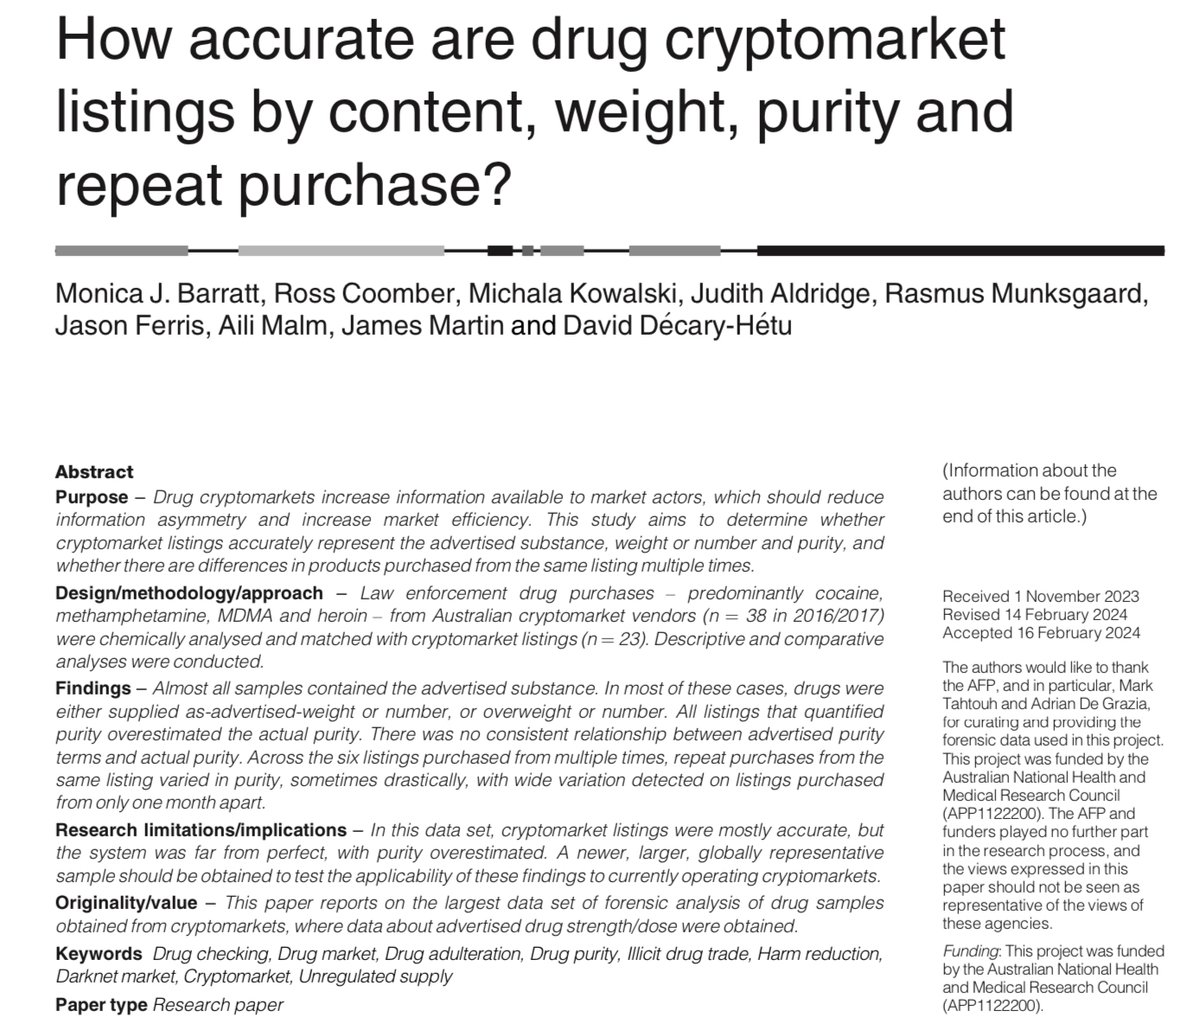 🔔#EarlyCite 'How accurate are drug cryptomarket listings by content, weight, purity and repeat purchase?' by @monicabarratt, @RossCoomber1, @MichalaKowalski & colleagues Access Updated Article Here: emerald.com/insight/conten…